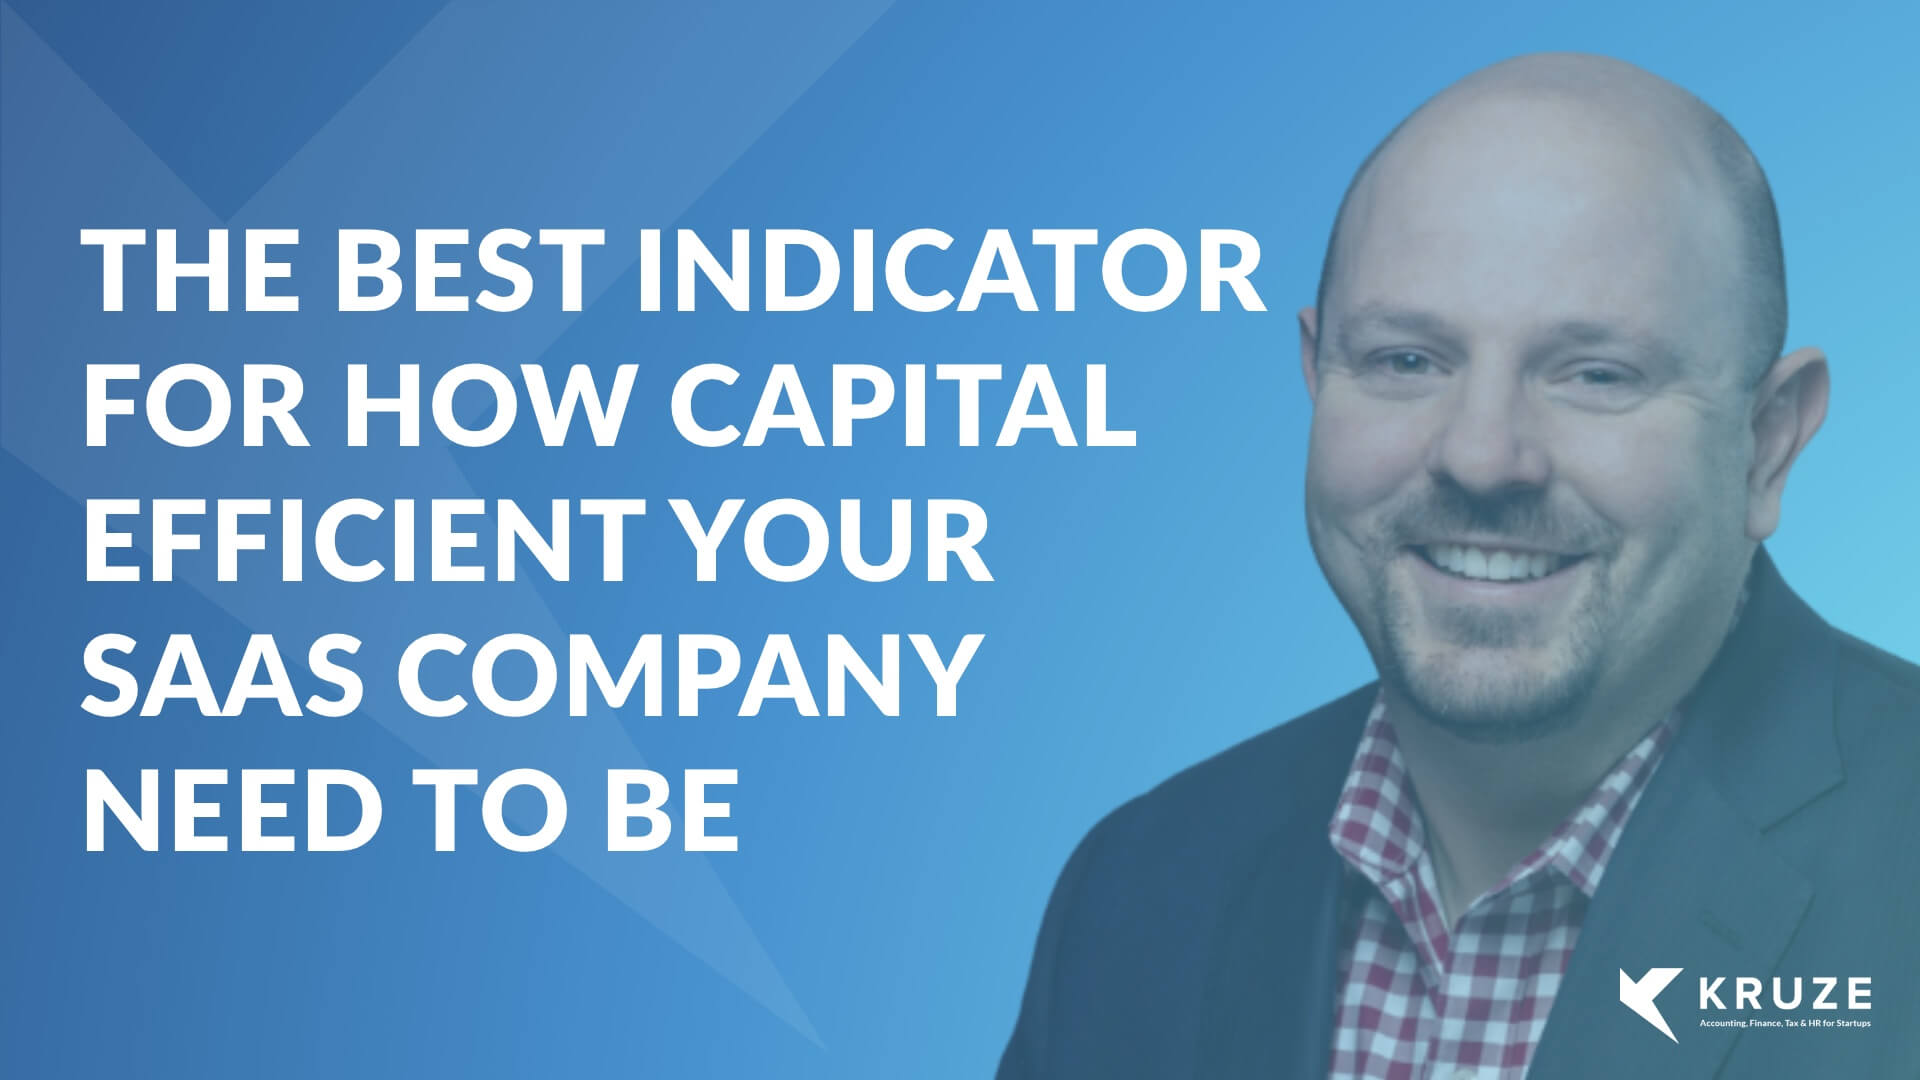 The Best Indicator of How Capital-Efficient Your SaaS Startup Should Be